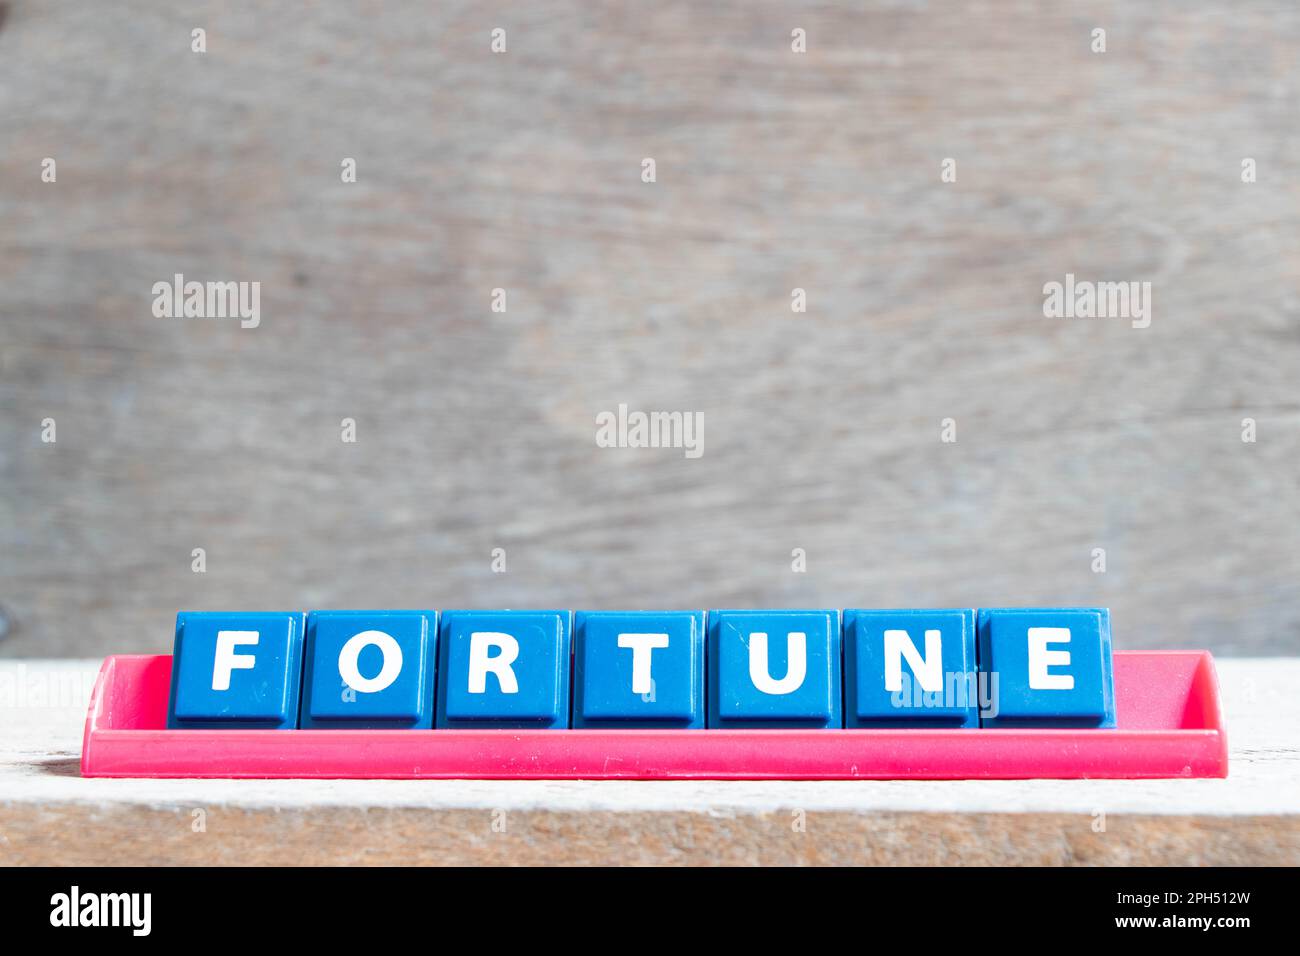 Tile alphabet letter with word fortune in red color rack on wood background Stock Photo